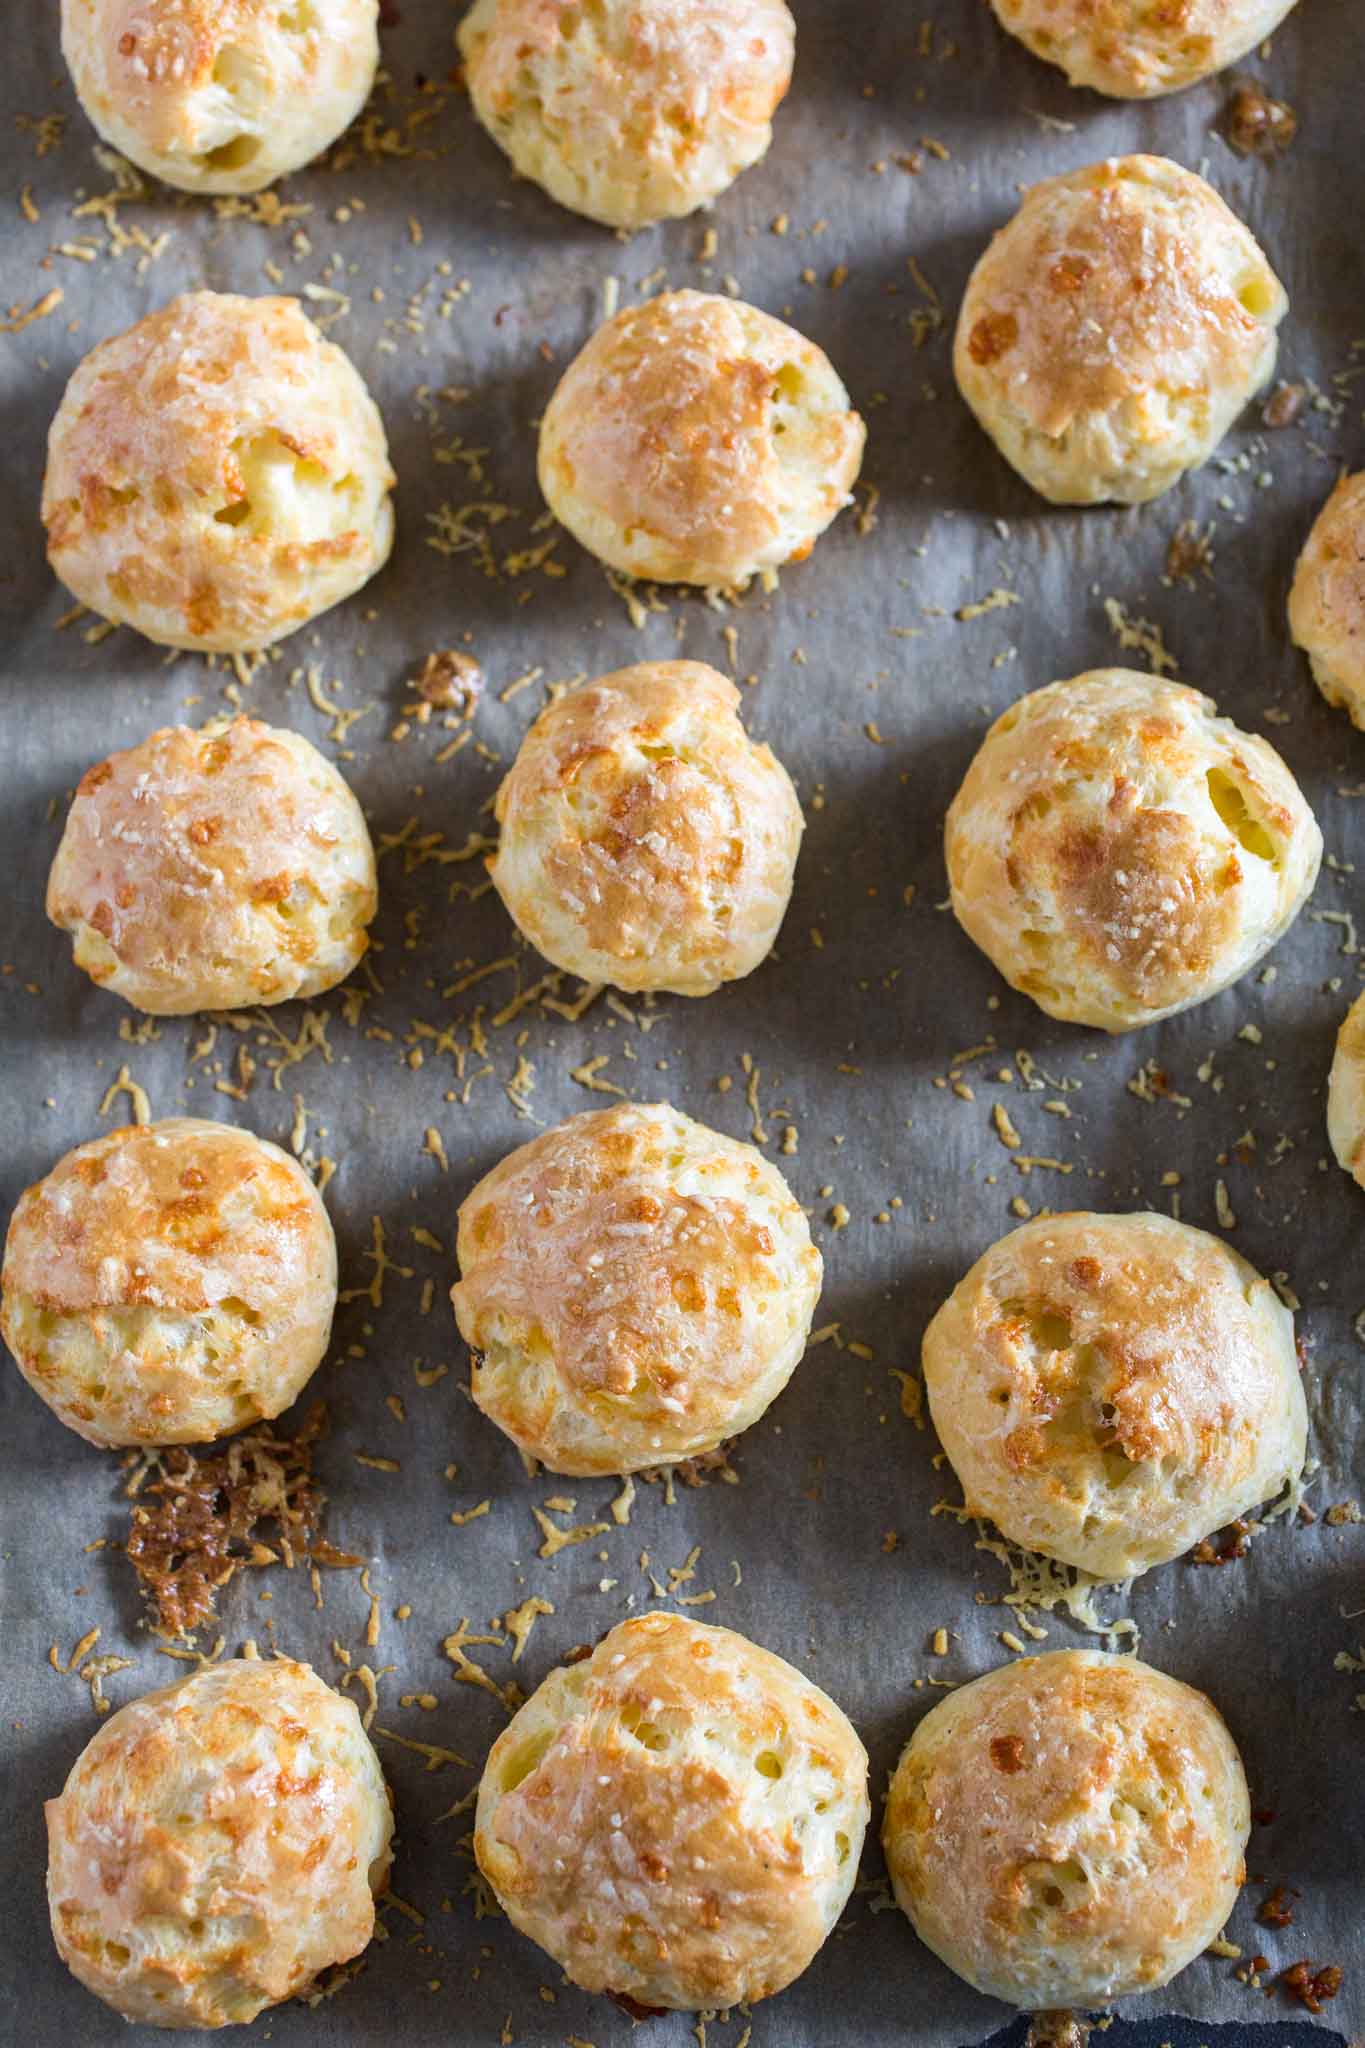 Gougeres (French Cheese Puffs) | www.oliviascuisine.com | A delicate savory hors d'oeuvre made with Gruyere cheese.